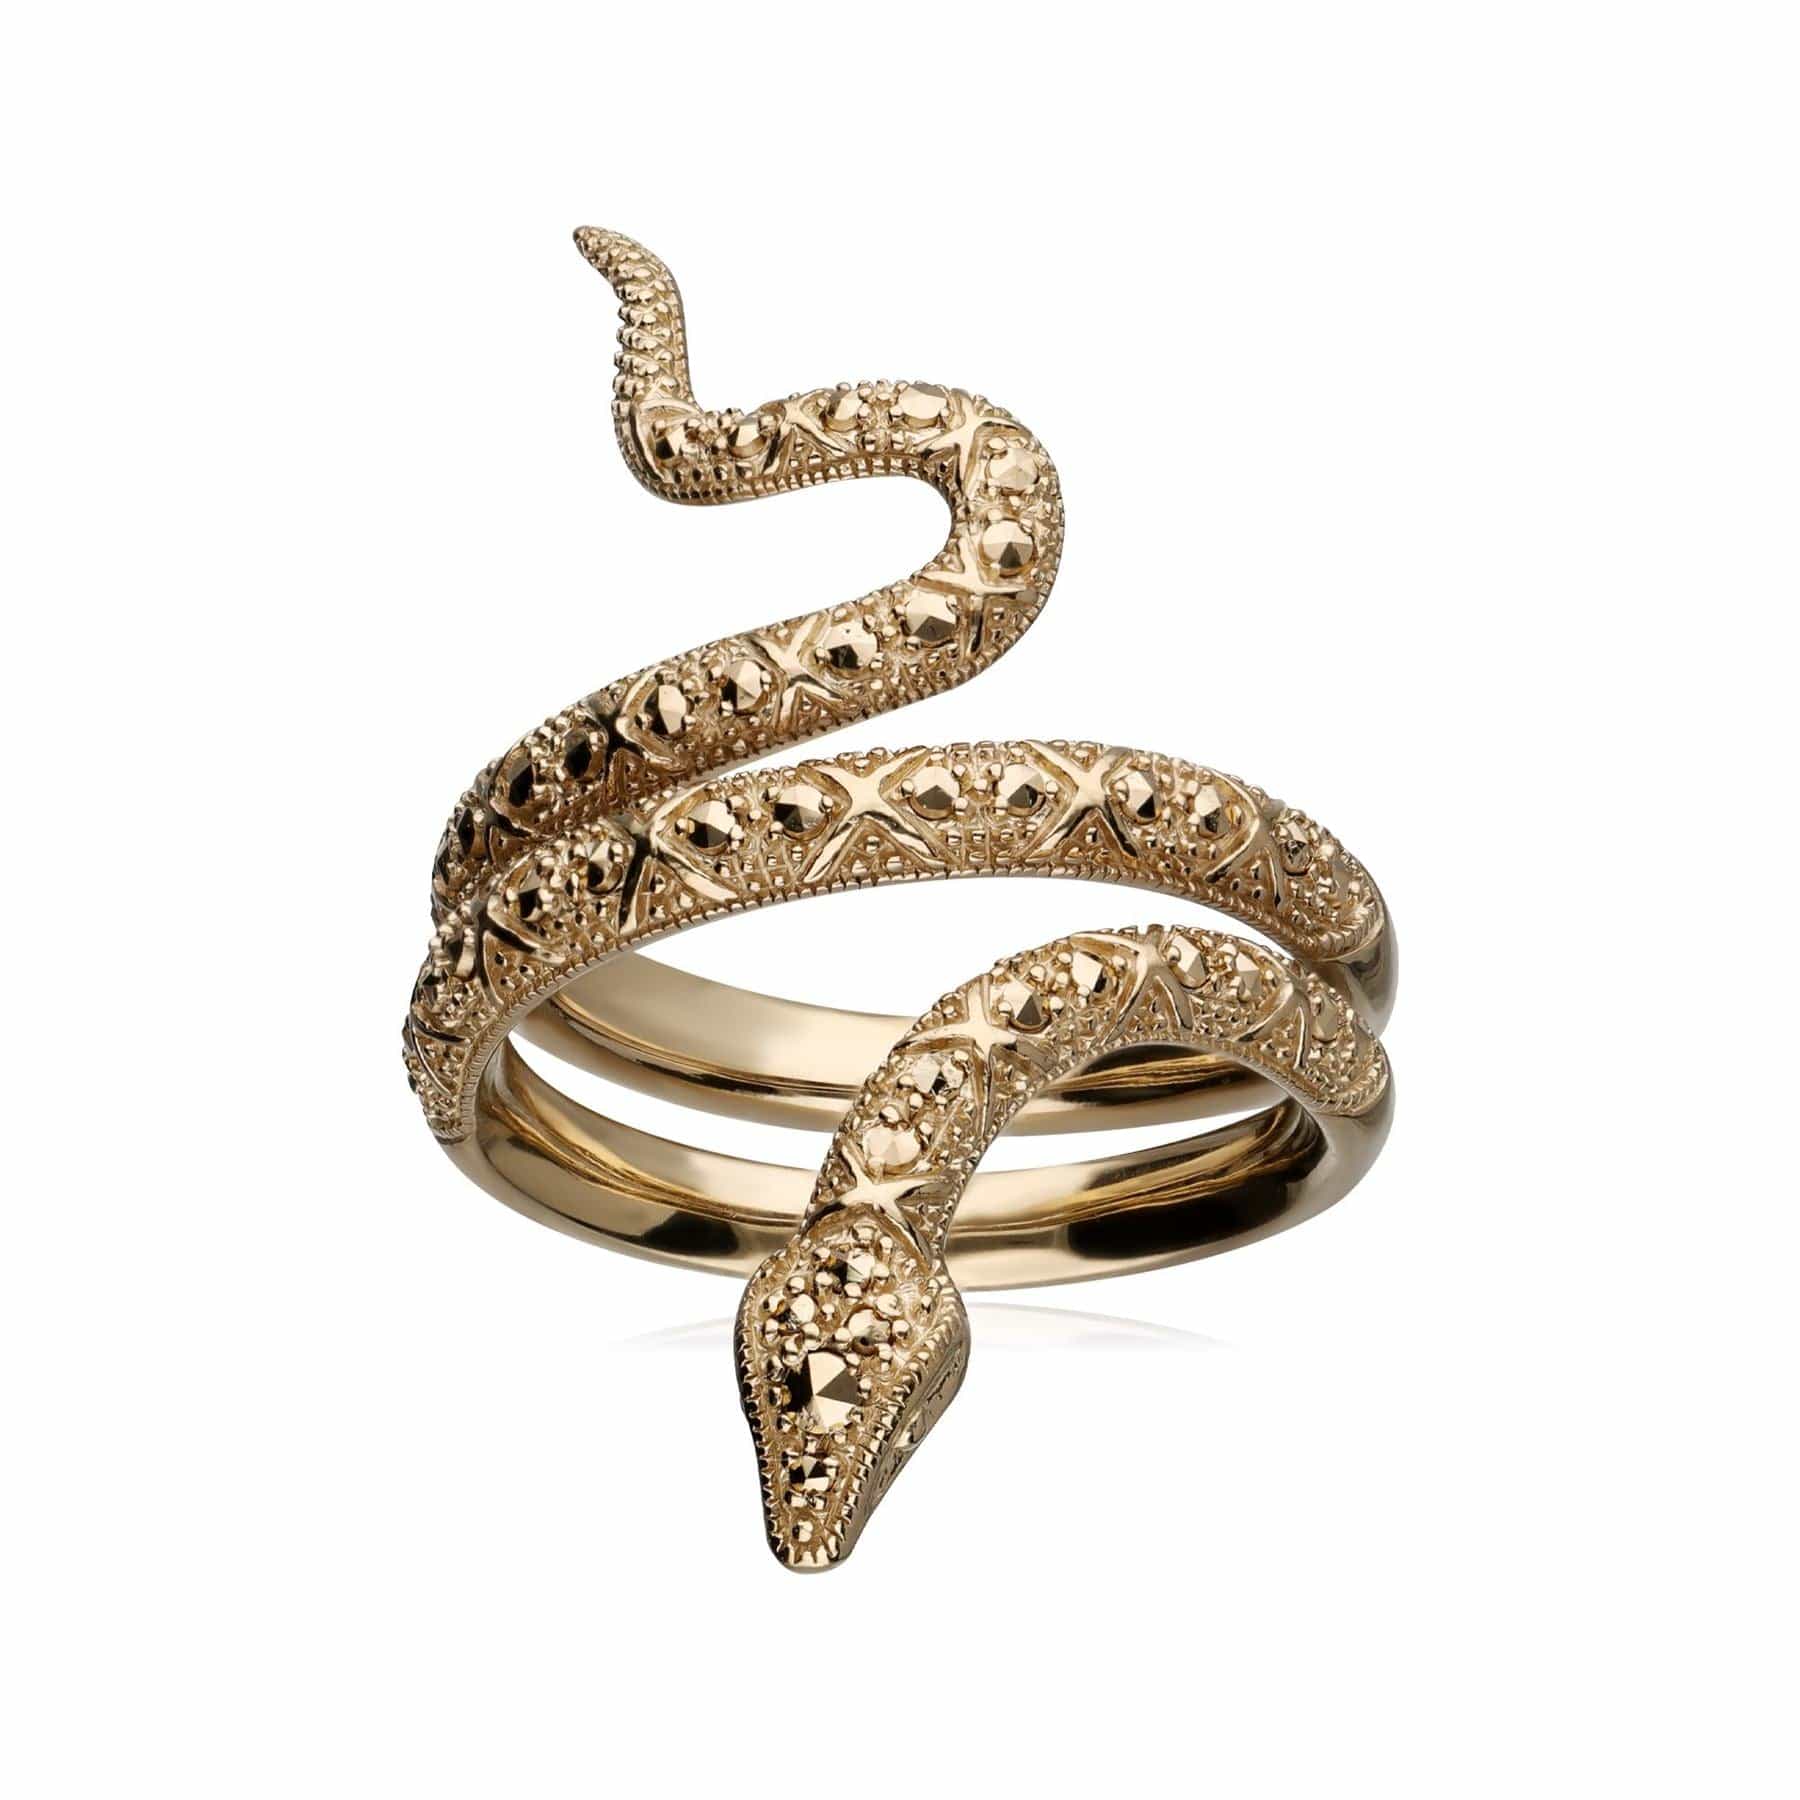 Marcasite Snake Wrap Ring in Gold Plated Sterling Silver